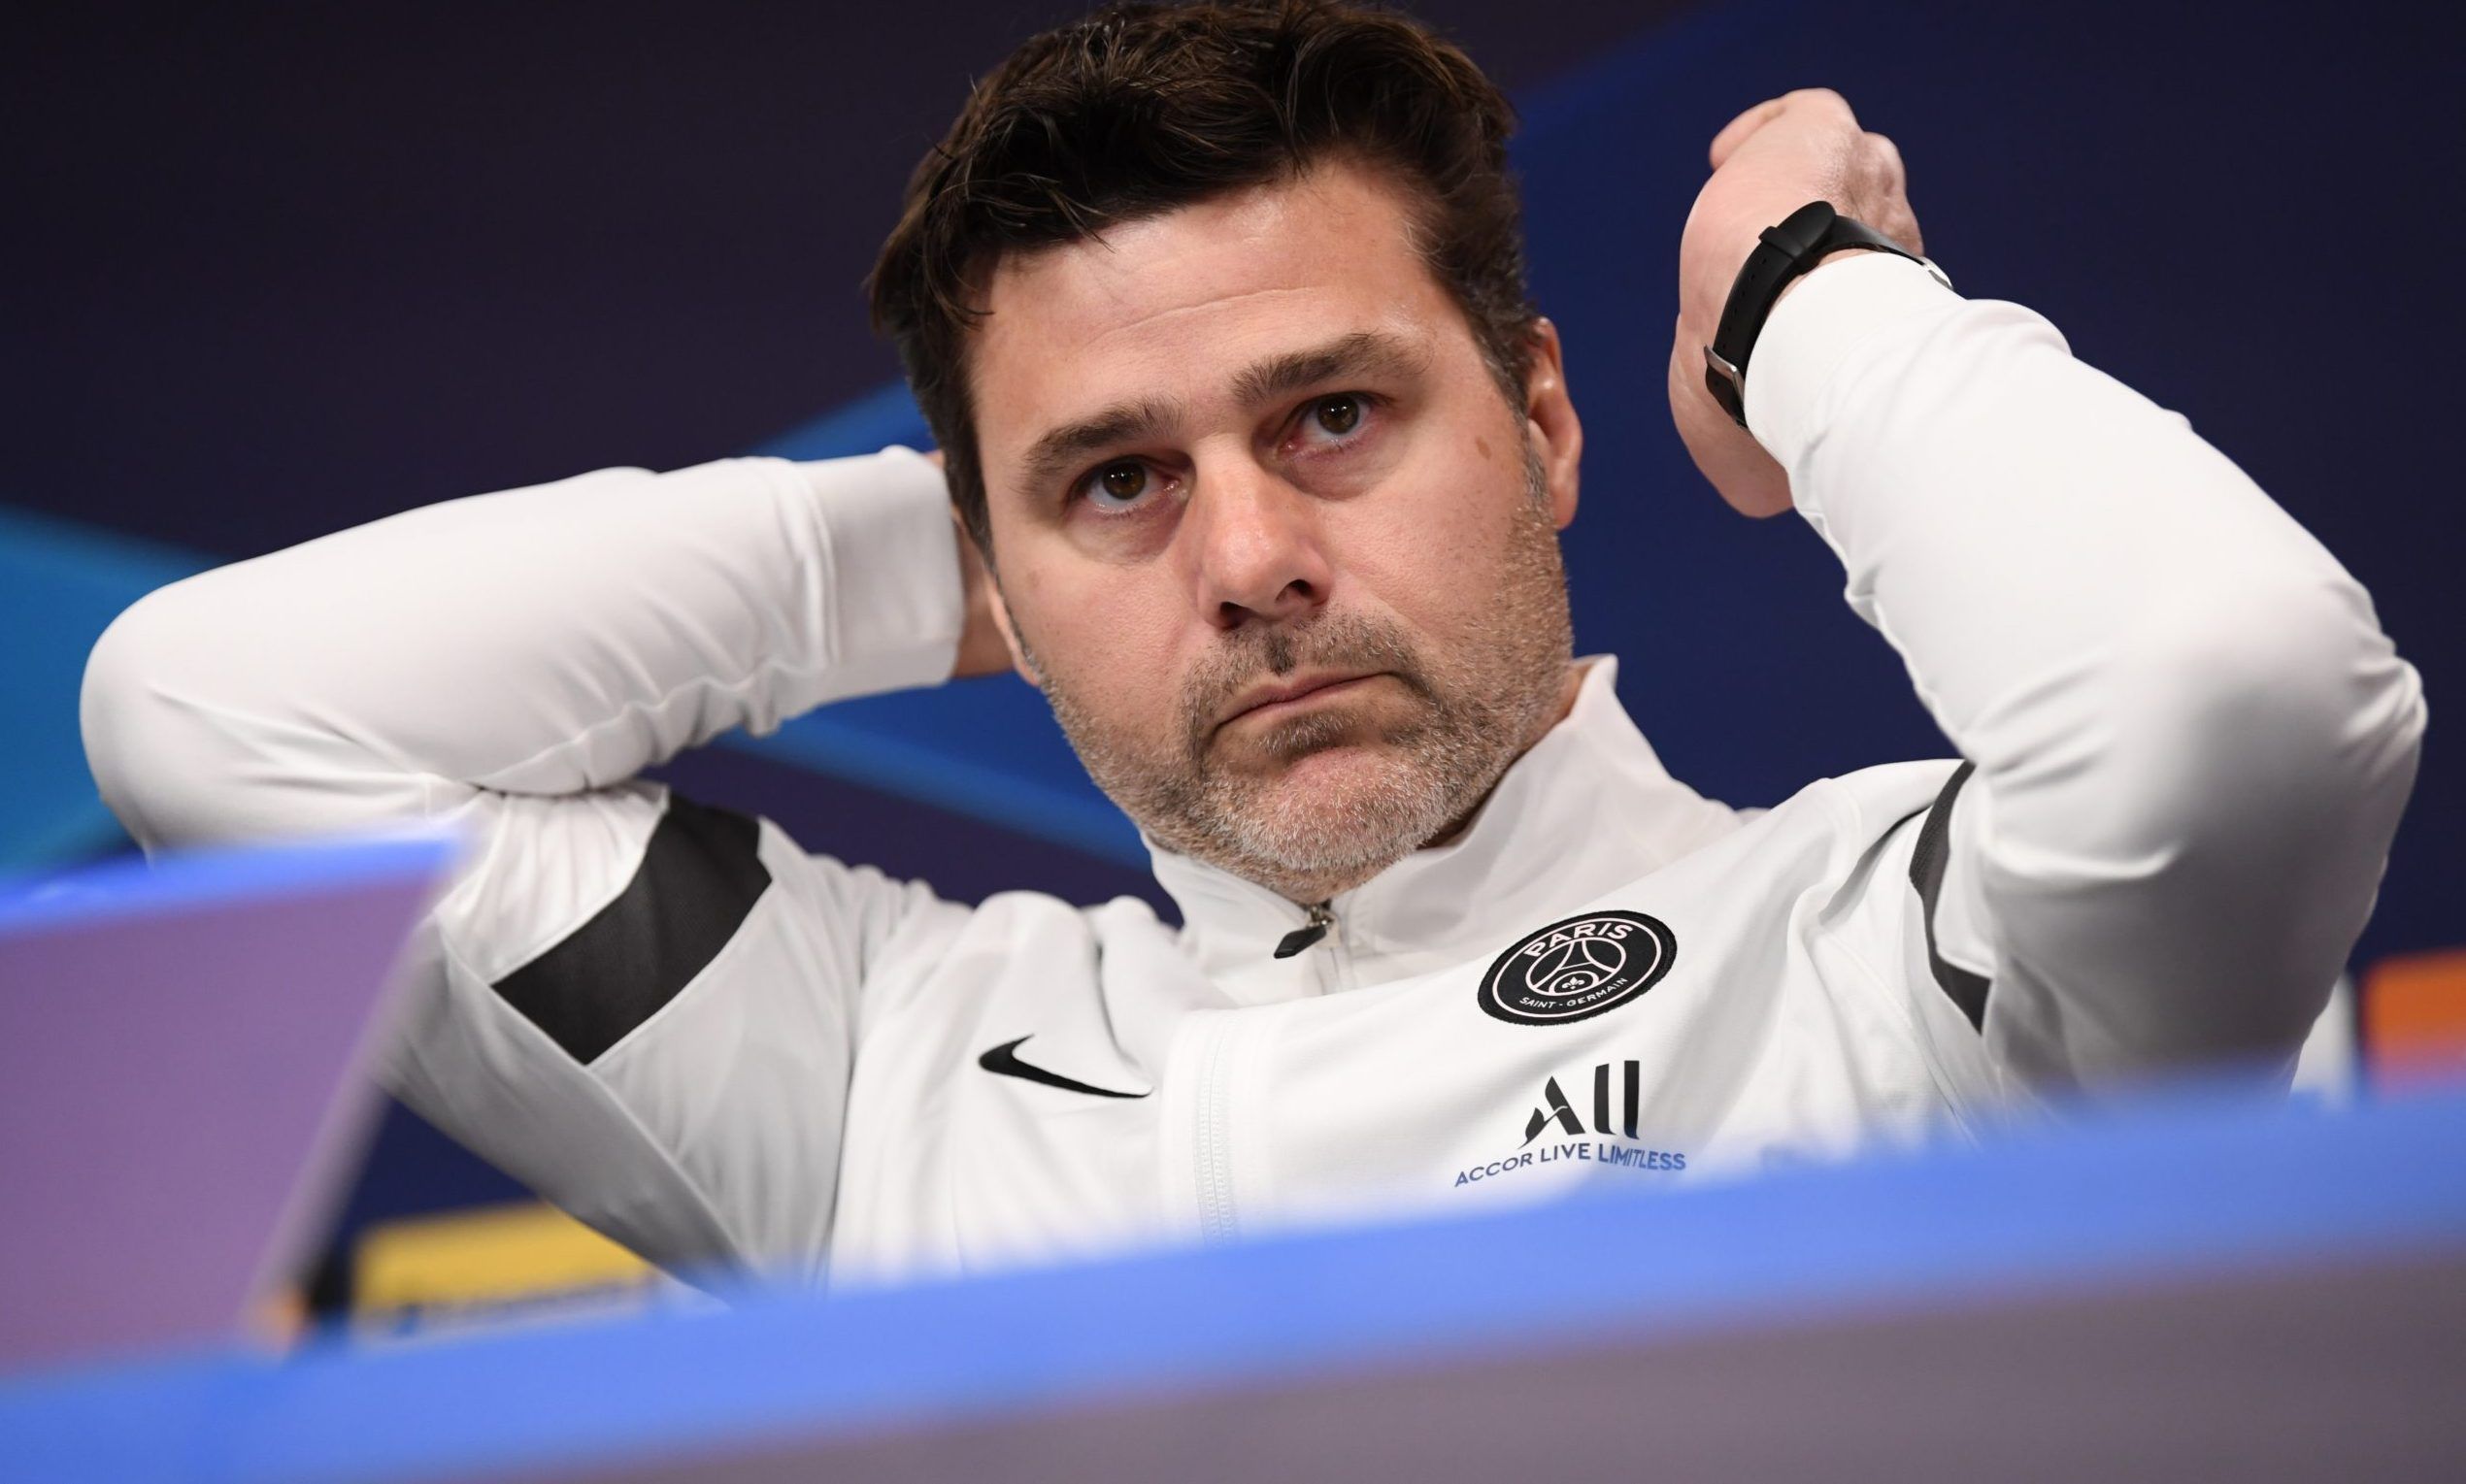 Soccer Football - Champions League - Paris St Germain Press Conference - Red Bull Arena, Leipzig, Germany - November 2, 2021 Paris St Germain's Mauricio Pochettino during the press conference REUTERS/Annegret Hilse